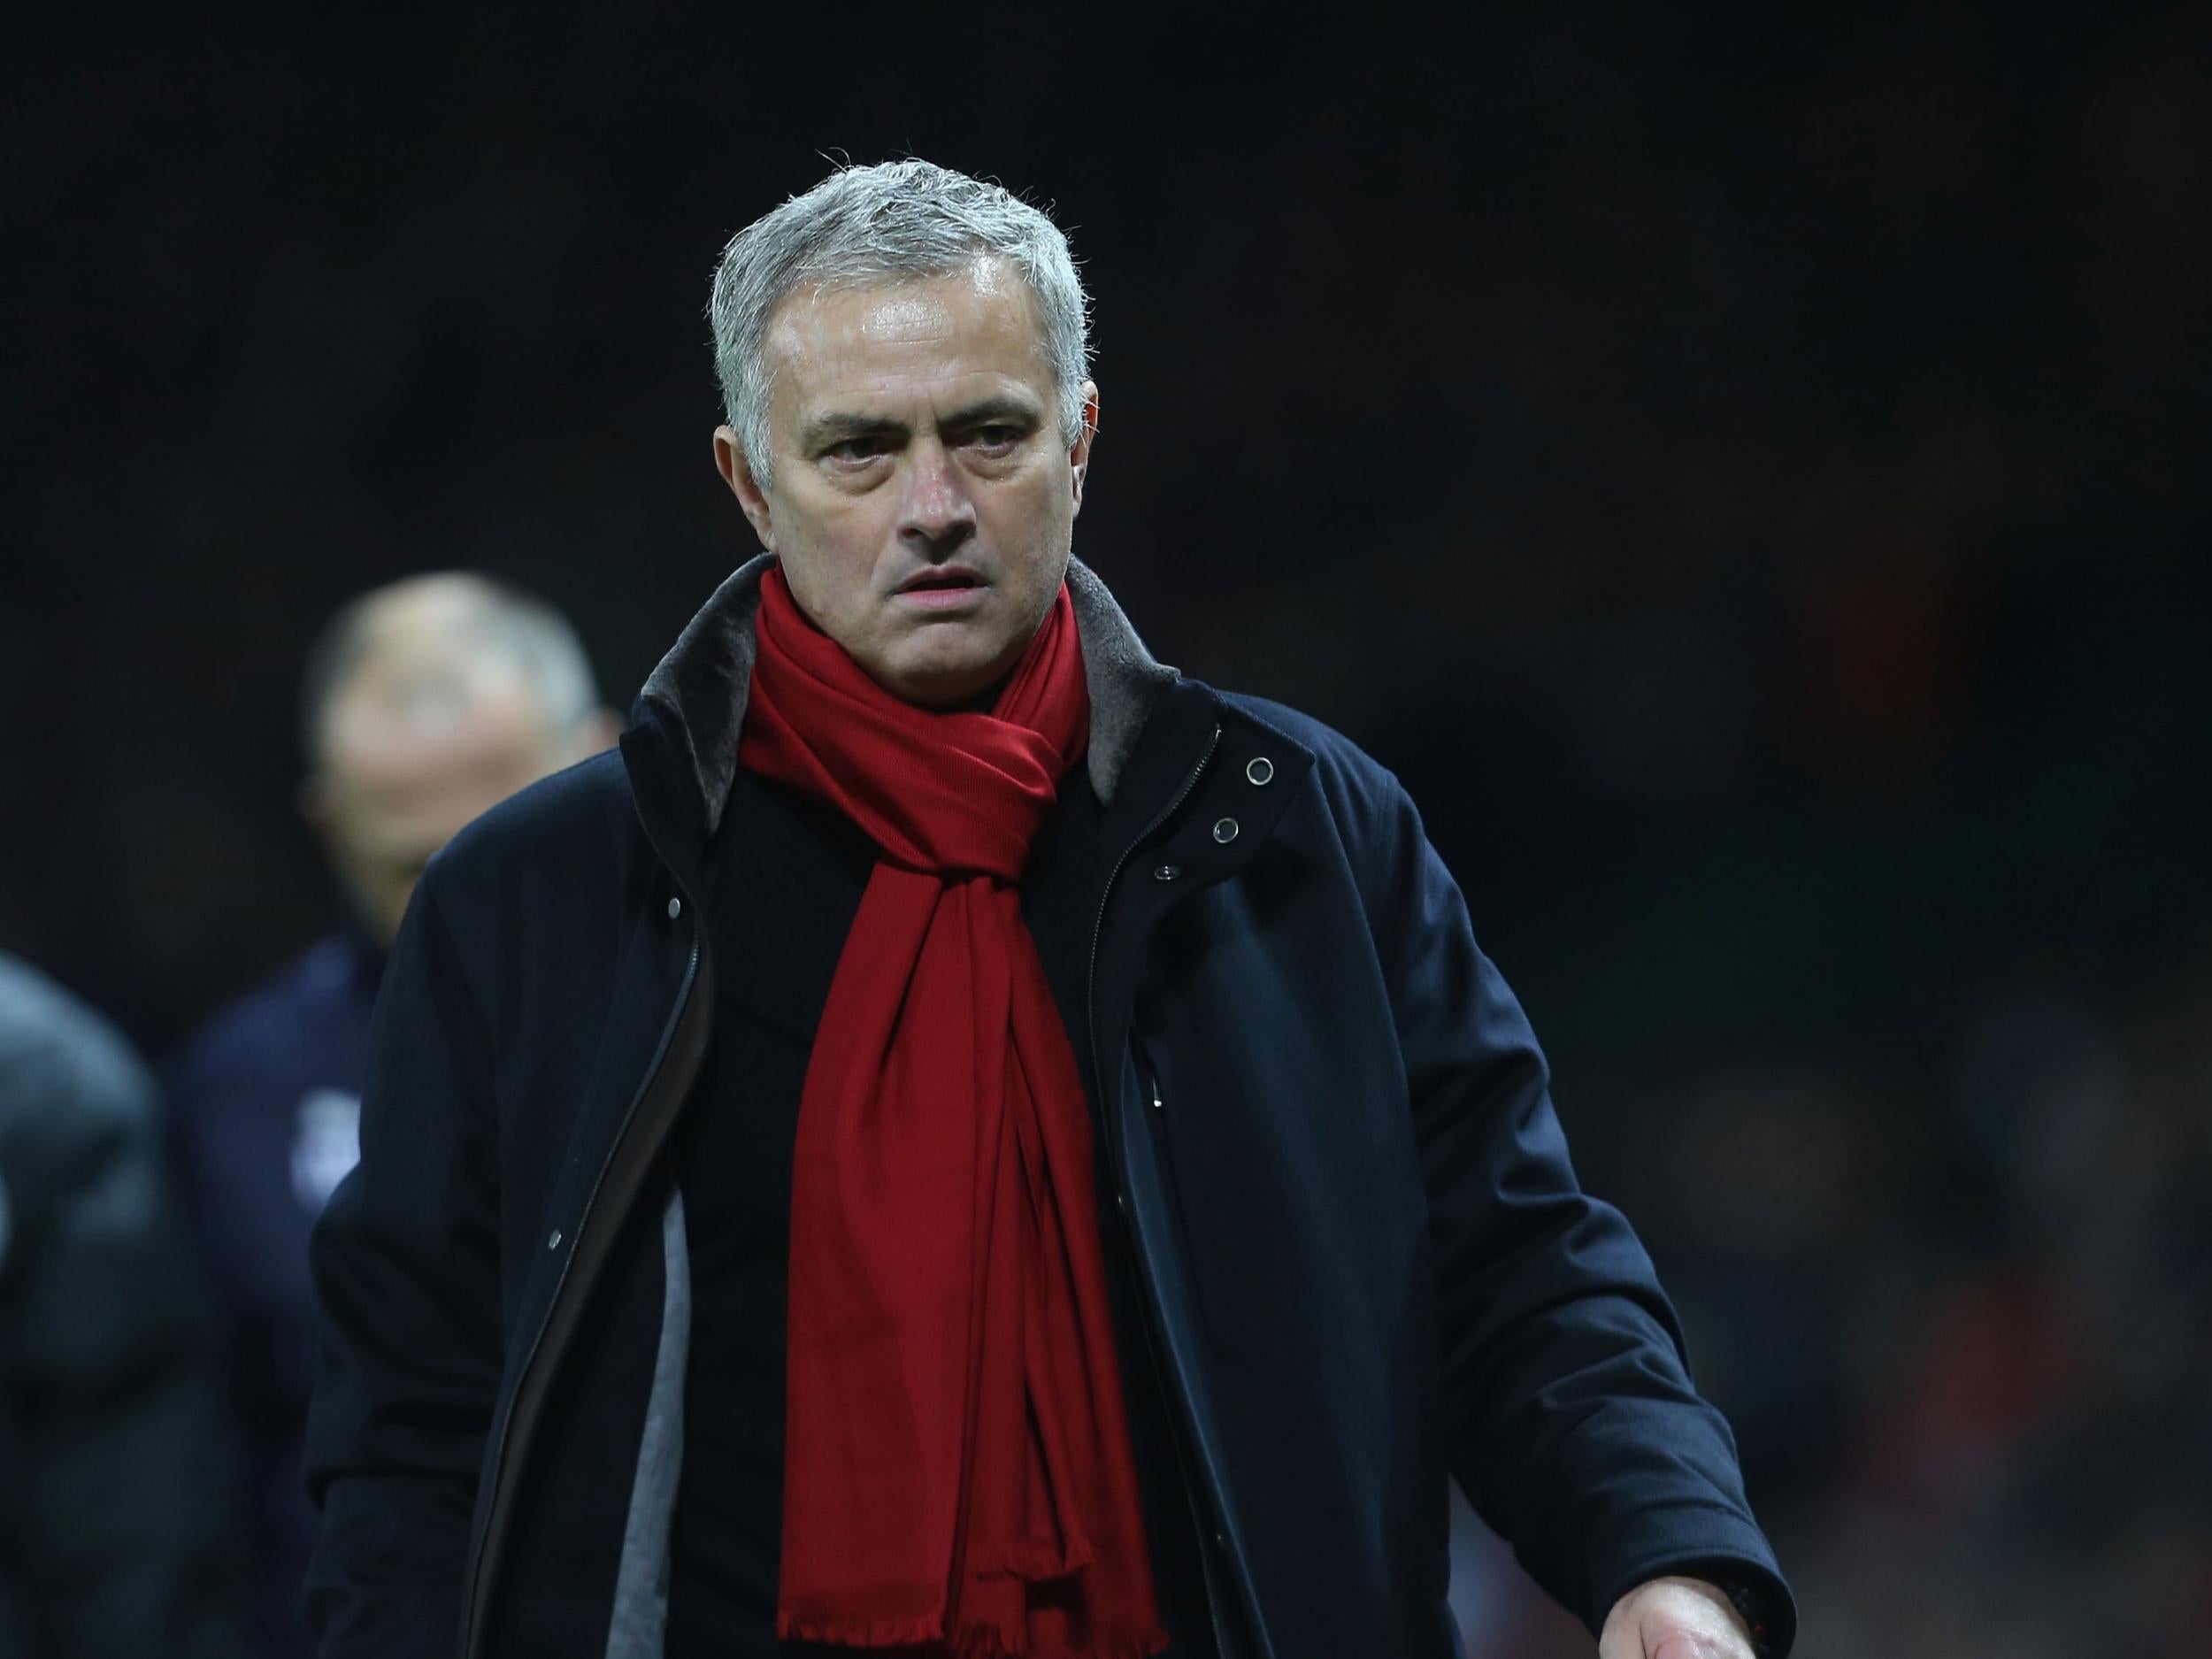 Jose Mourinho saw his side concede yet more ground in the title race on Boxing Day